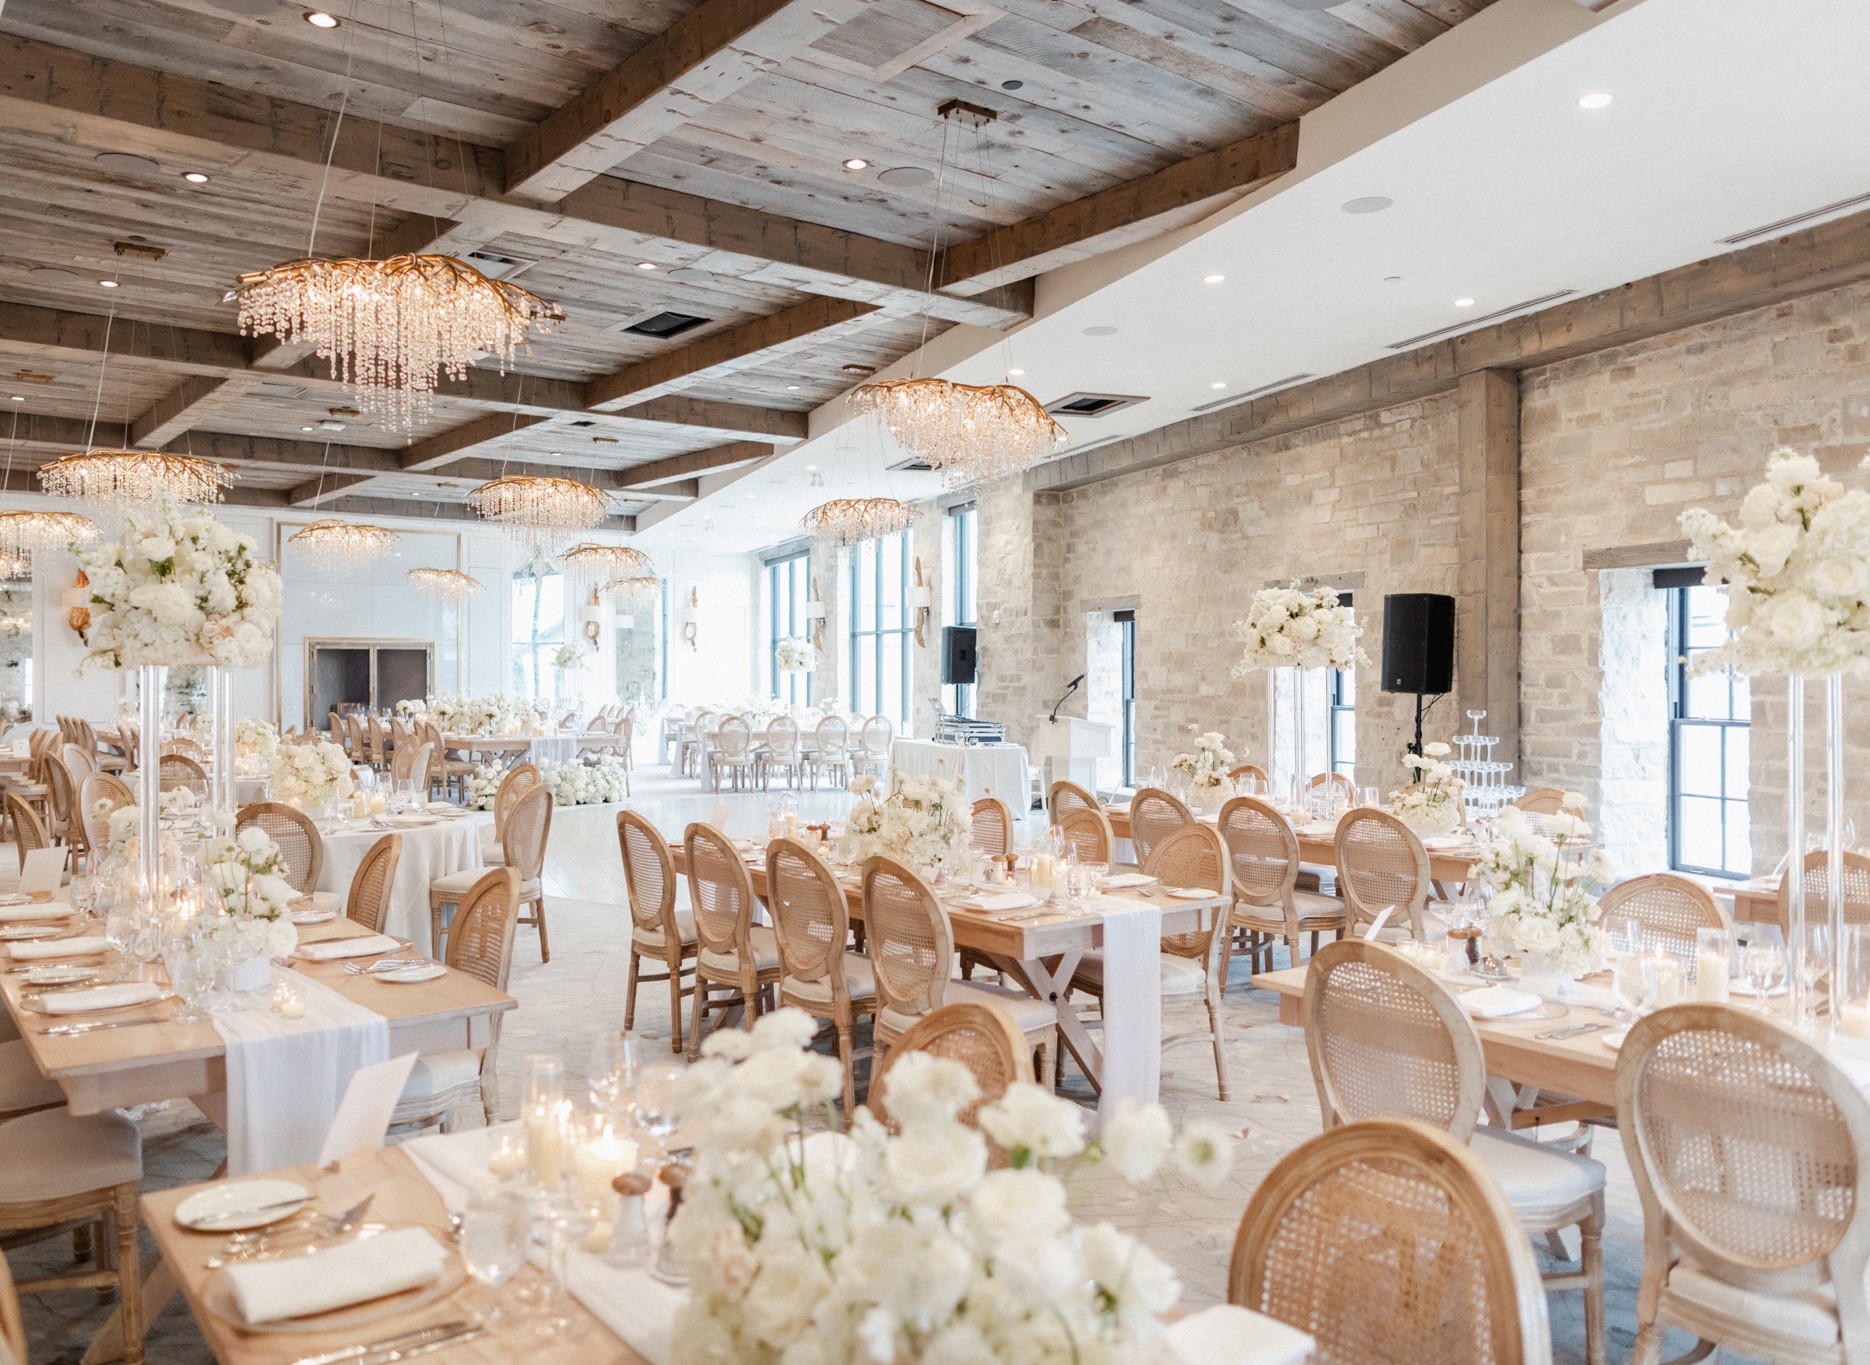 A rustic wedding reception at Elora Mill, adorned with elegant white flowers, creating a charming ambiance.